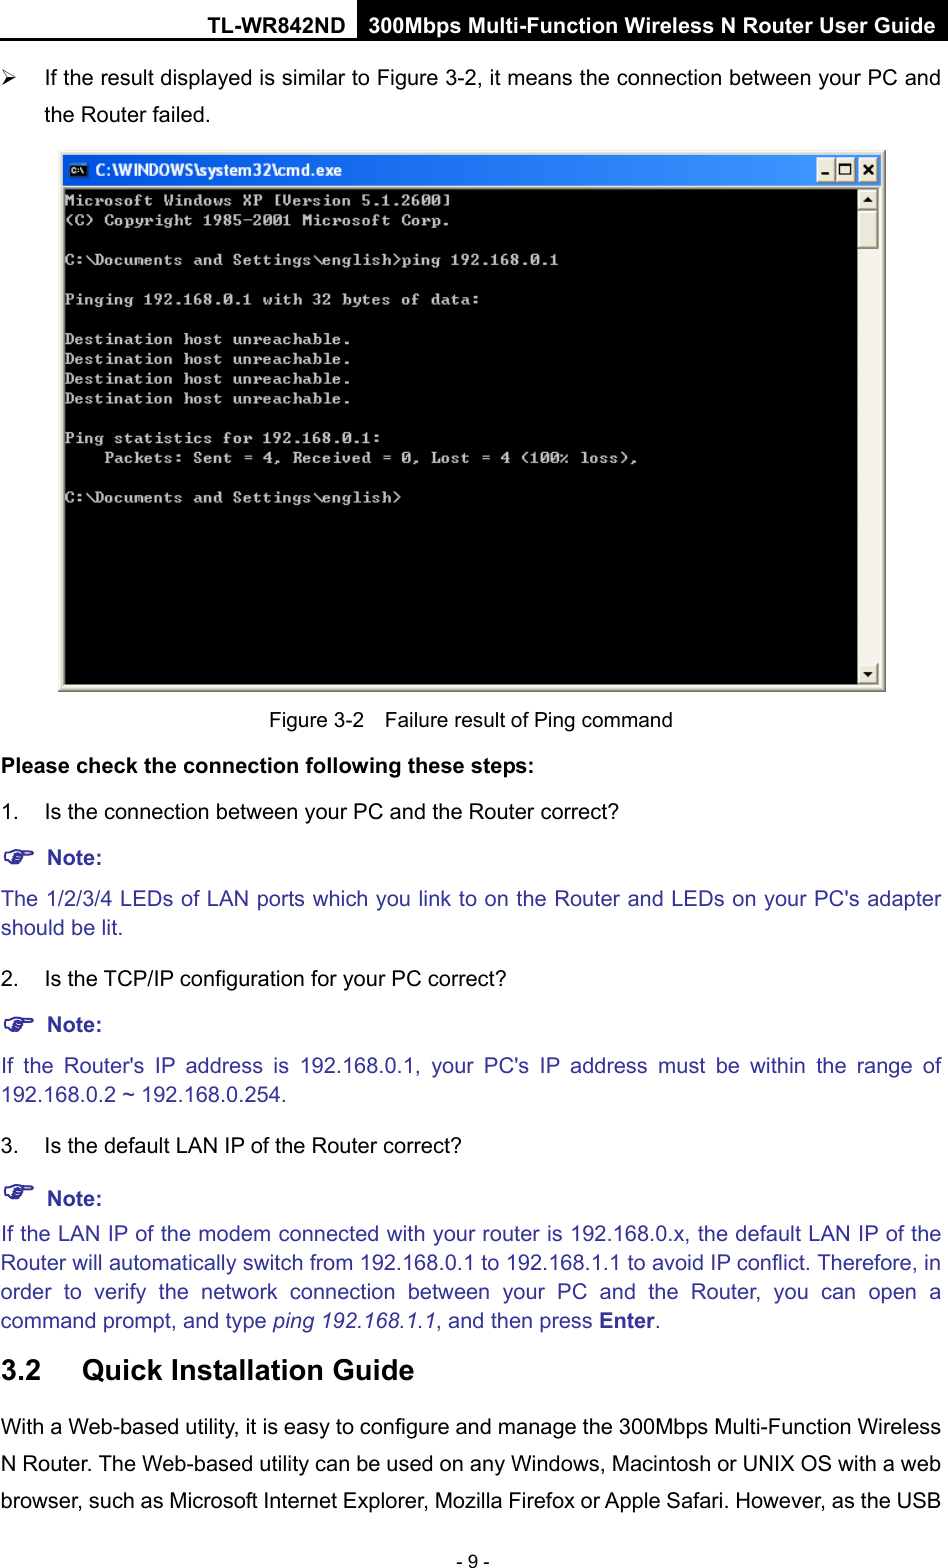 TL-WR842ND 300Mbps Multi-Function Wireless N Router User Guide  - 9 -  If the result displayed is similar to Figure 3-2, it means the connection between your PC and the Router failed.    Figure 3-2  Failure result of Ping command Please check the connection following these steps: 1. Is the connection between your PC and the Router correct?  Note:     The 1/2/3/4 LEDs of LAN ports which you link to on the Router and LEDs on your PC&apos;s adapter should be lit. 2. Is the TCP/IP configuration for your PC correct?  Note:   If  the Router&apos;s IP address is 192.168.0.1, your PC&apos;s IP address must be within the range of 192.168.0.2 ~ 192.168.0.254. 3. Is the default LAN IP of the Router correct?  Note:   If the LAN IP of the modem connected with your router is 192.168.0.x, the default LAN IP of the Router will automatically switch from 192.168.0.1 to 192.168.1.1 to avoid IP conflict. Therefore, in order to verify the network connection between your PC and the Router,  you can open a command prompt, and type ping 192.168.1.1, and then press Enter. 3.2 Quick Installation Guide With a Web-based utility, it is easy to configure and manage the 300Mbps Multi-Function Wireless N Router. The Web-based utility can be used on any Windows, Macintosh or UNIX OS with a web browser, such as Microsoft Internet Explorer, Mozilla Firefox or Apple Safari. However, as the USB 